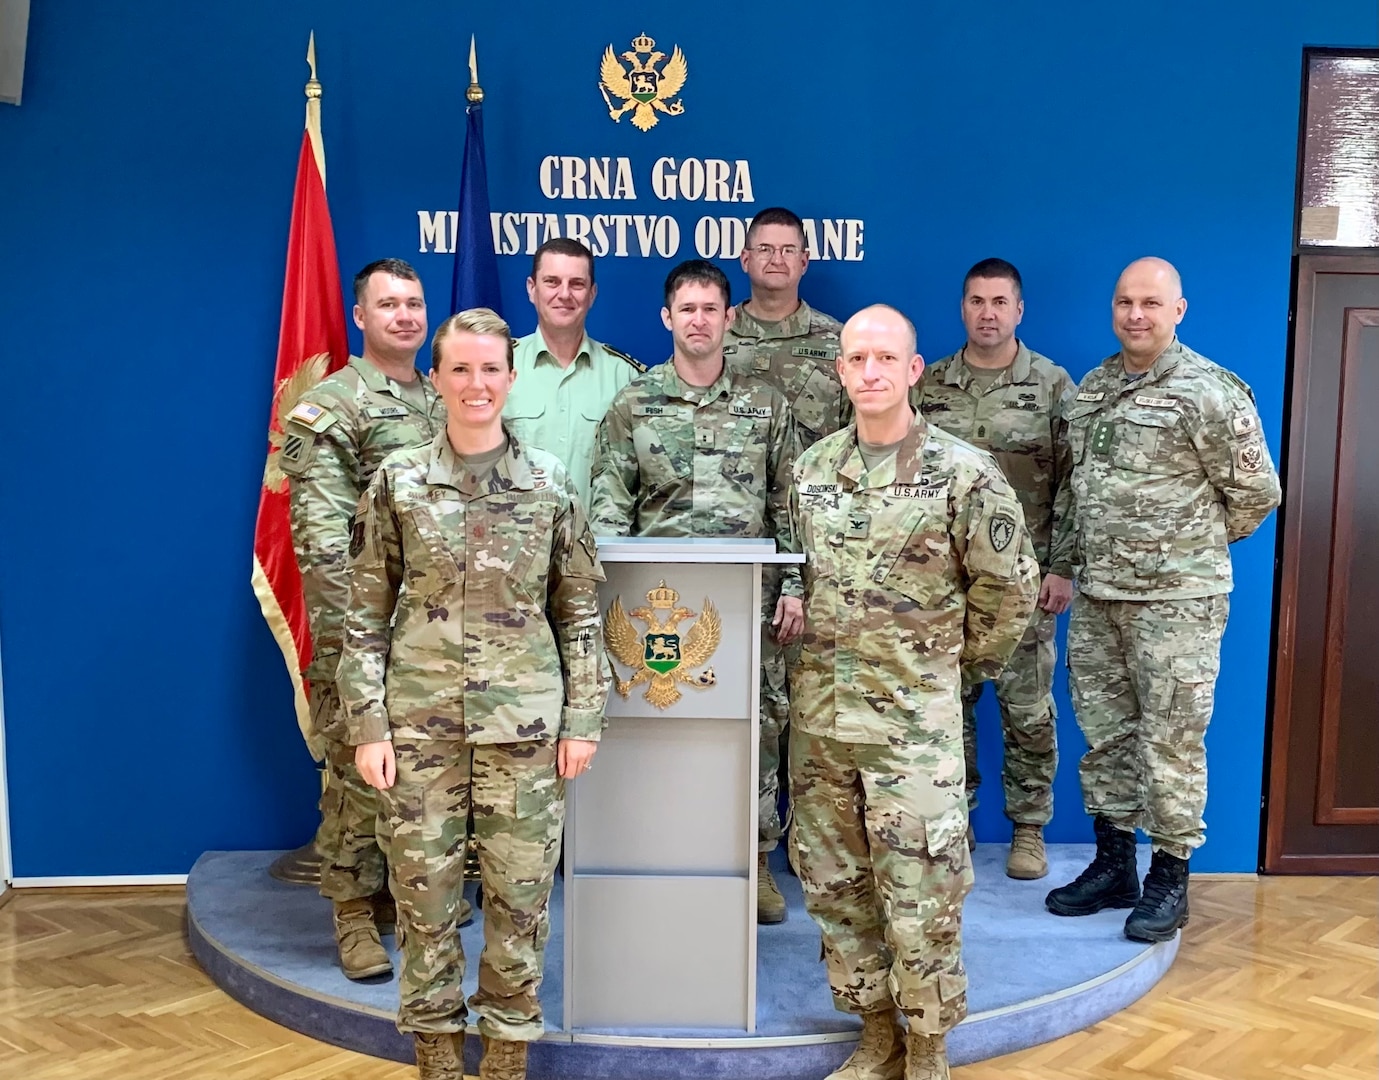 Maine Air National Guard Maj. Carolyn Richley, bilateral affairs officer, in Montenegro. Maine and Montenegro have been partners for 15 years under the Department of Defense State Partnership Program, building a cooperative mutually beneficial relationship.